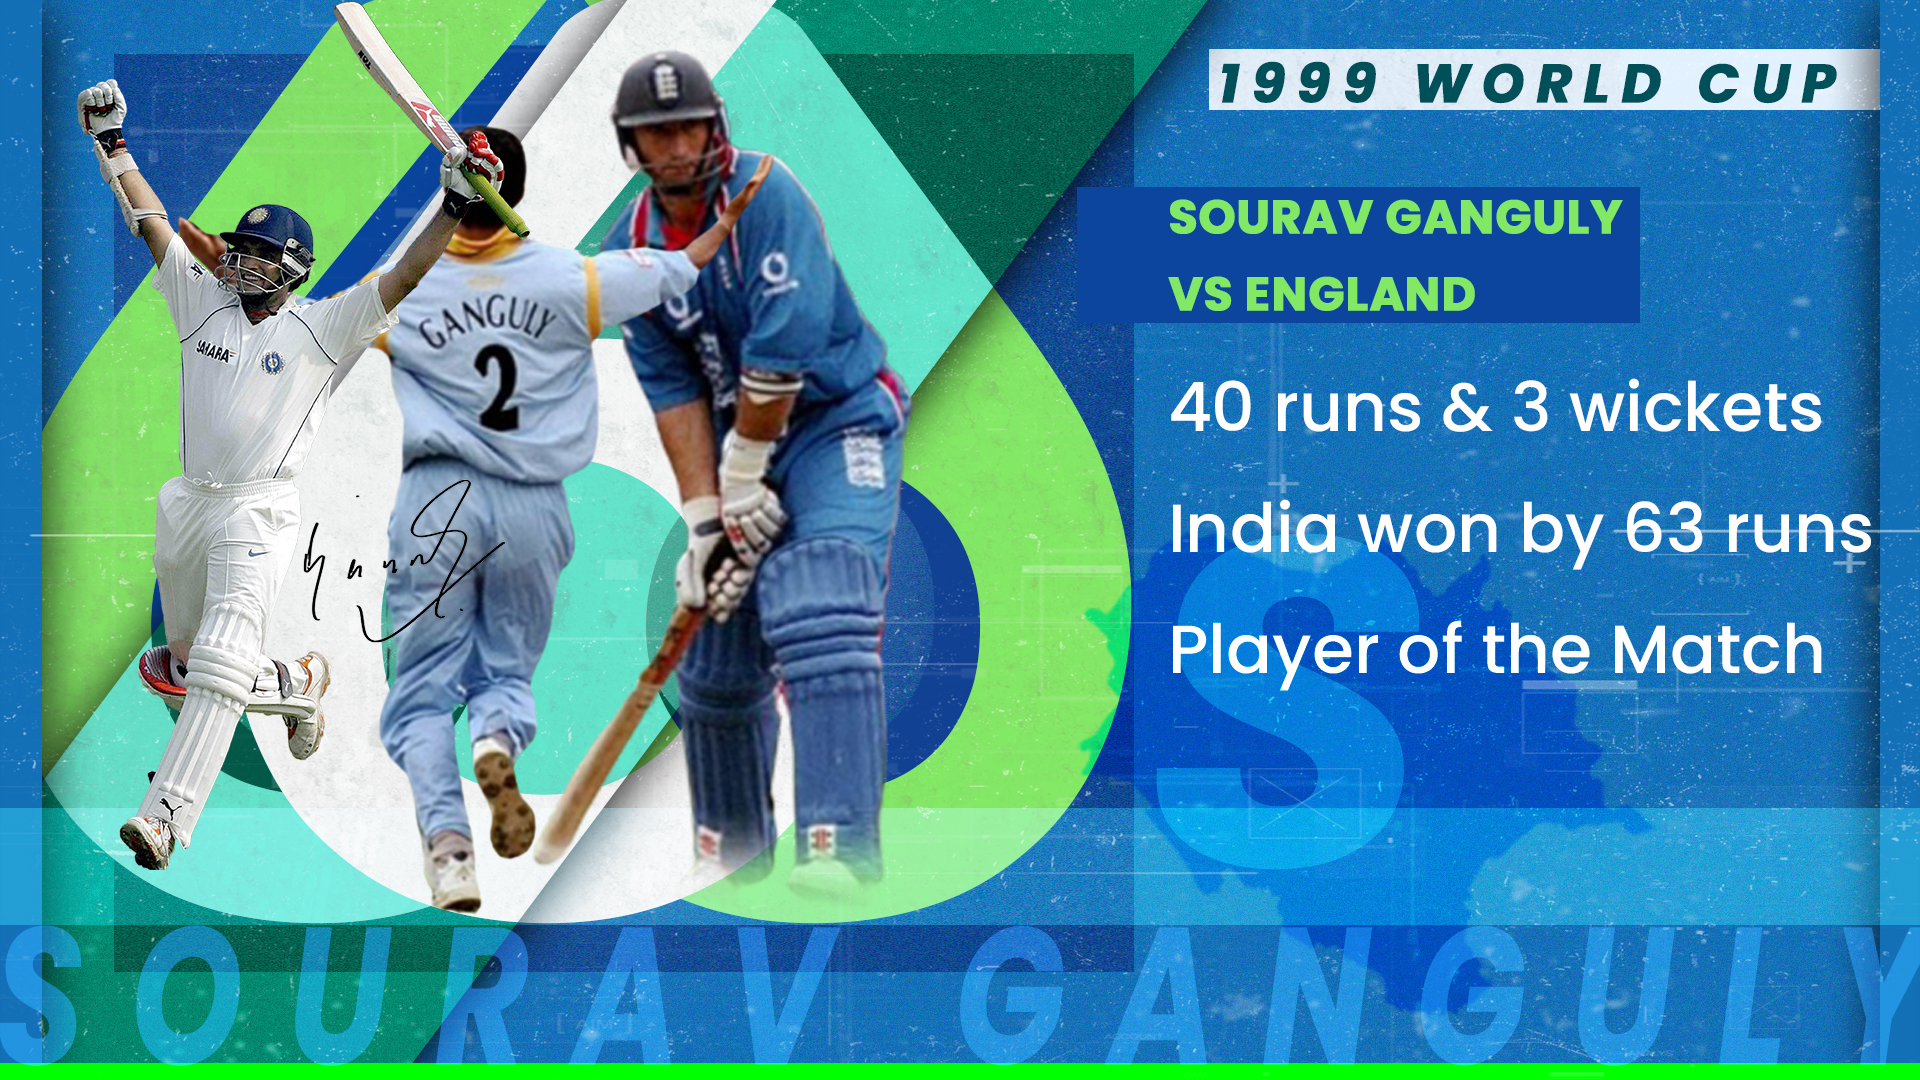 Sourav Ganguly's Man of the Match winning performance against England.